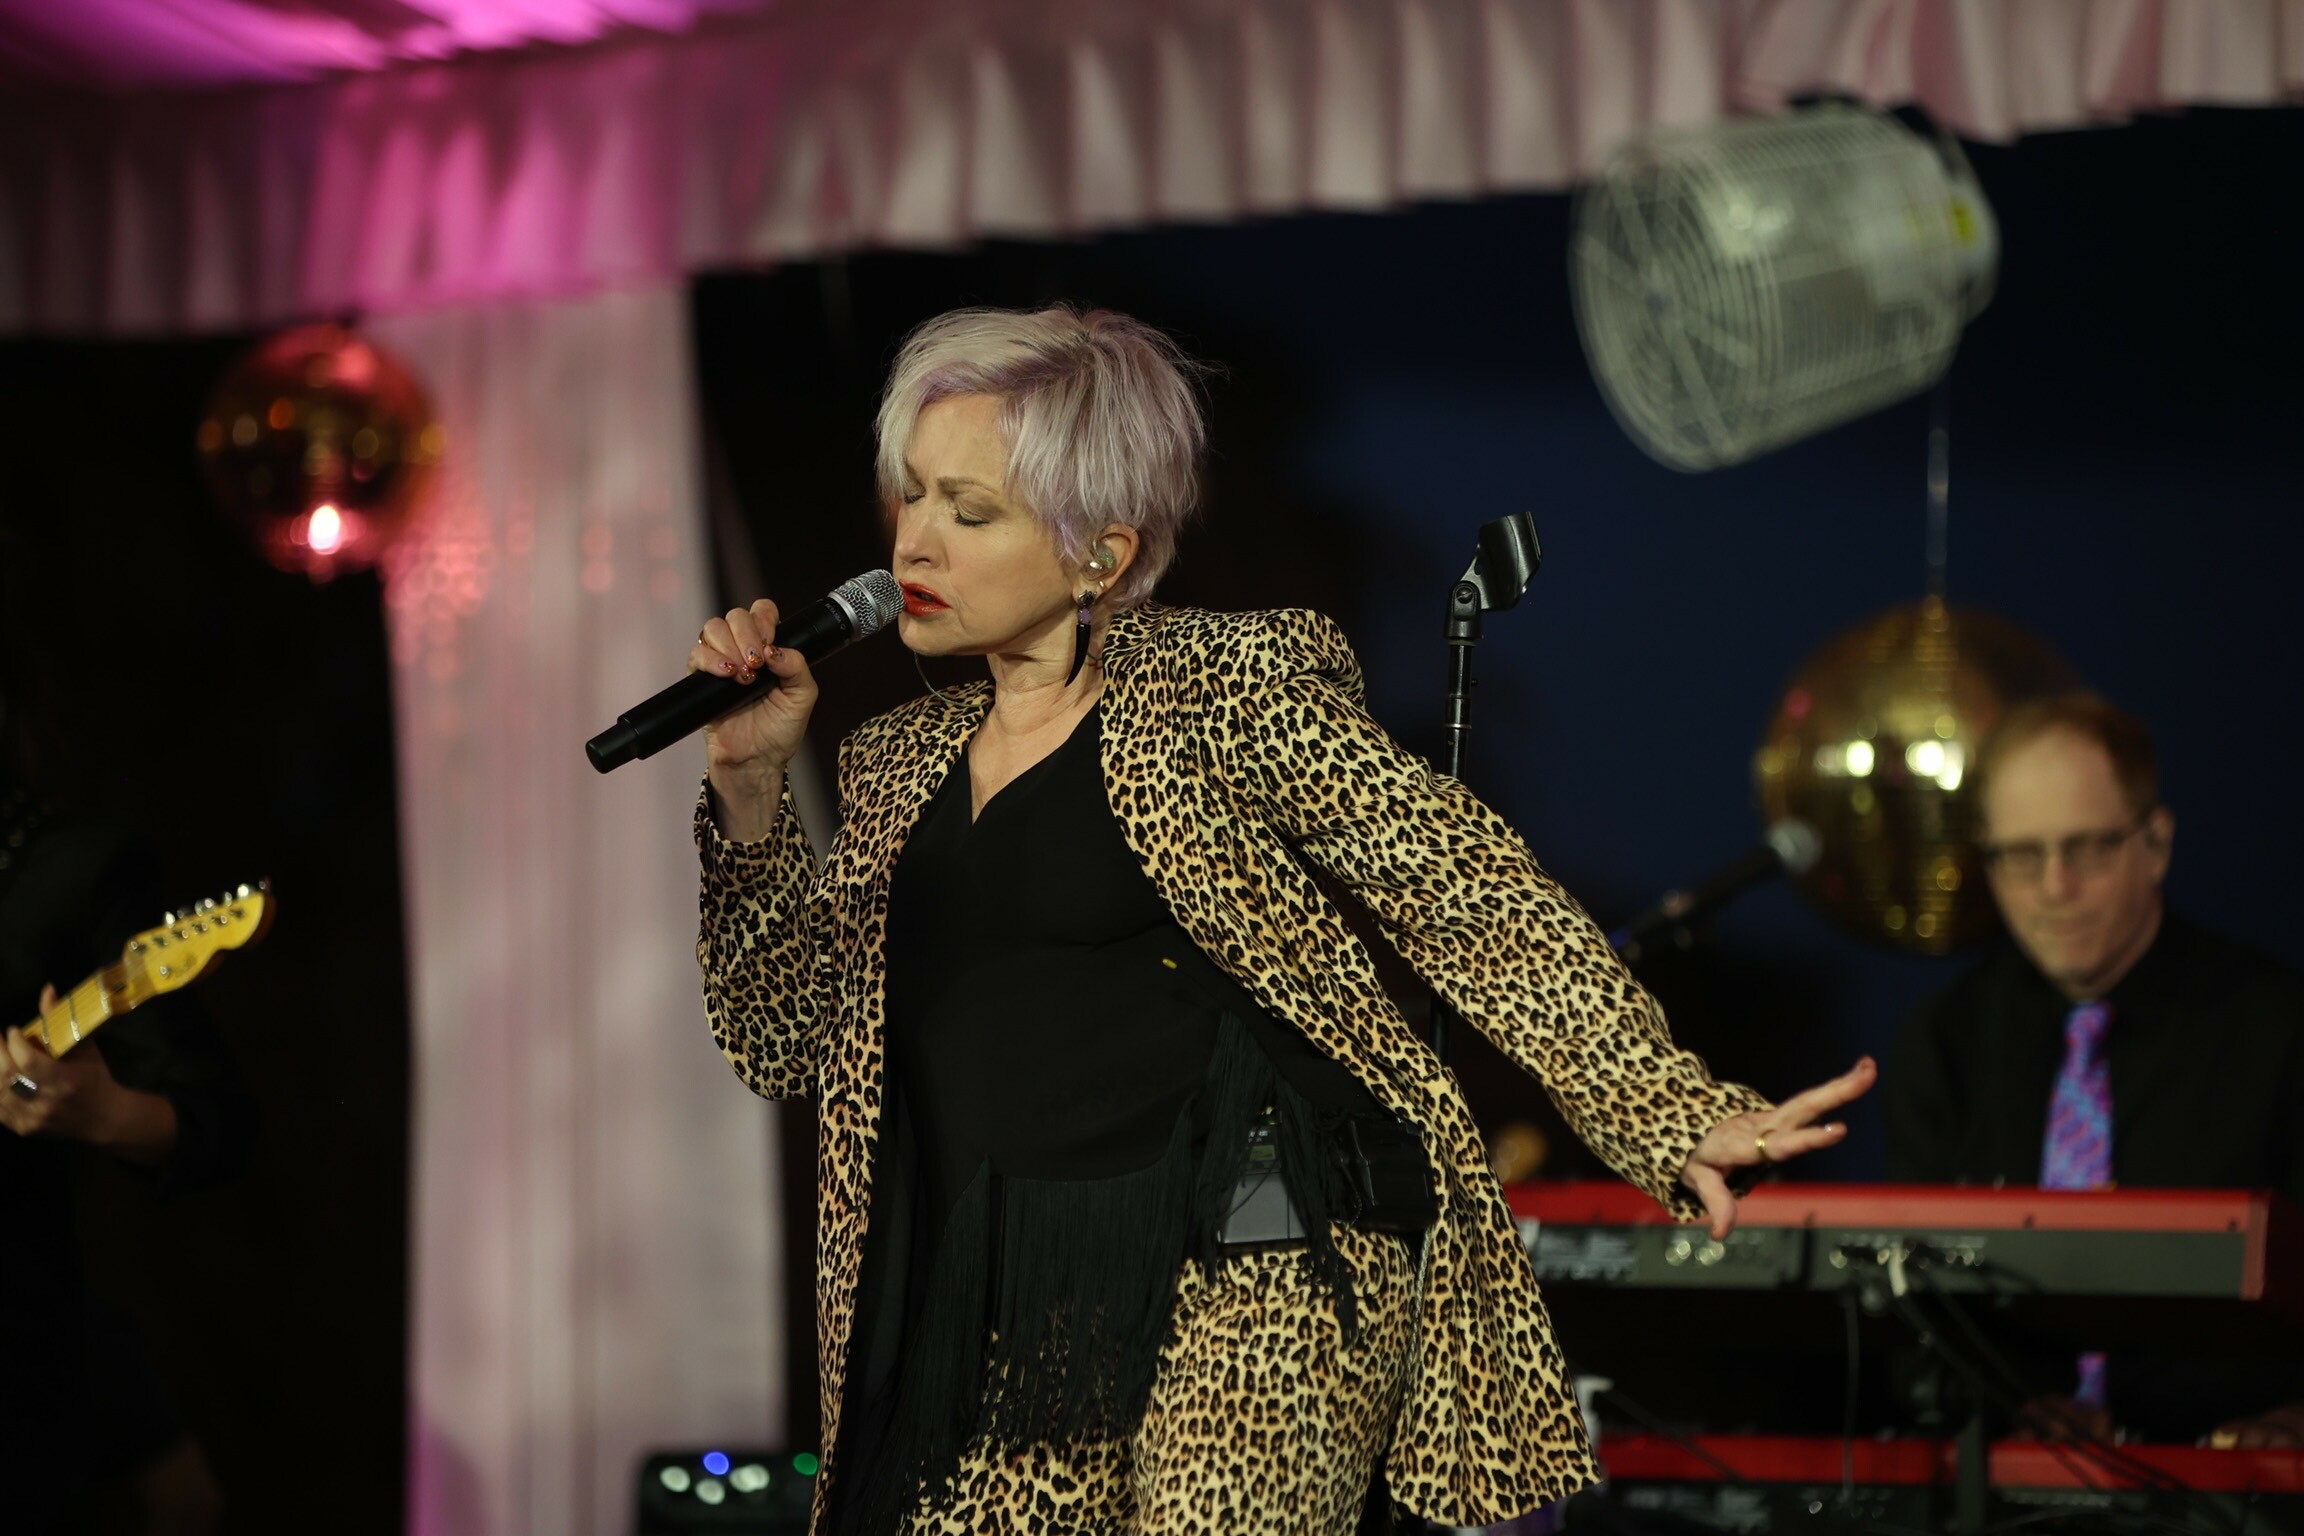 Grammy, Emmy and Tony Award-winning songwriter and performing artist Cyndi Lauper performed at Northwell Health’s fourth annual Summer Hamptons Evening (SHE) on August 13, at the Water Mill home of Victoria Moran-Furman. The event raised $925,000 for the Katz Institute for Women’s Health. COURTESY NORTHWELL HEALTH